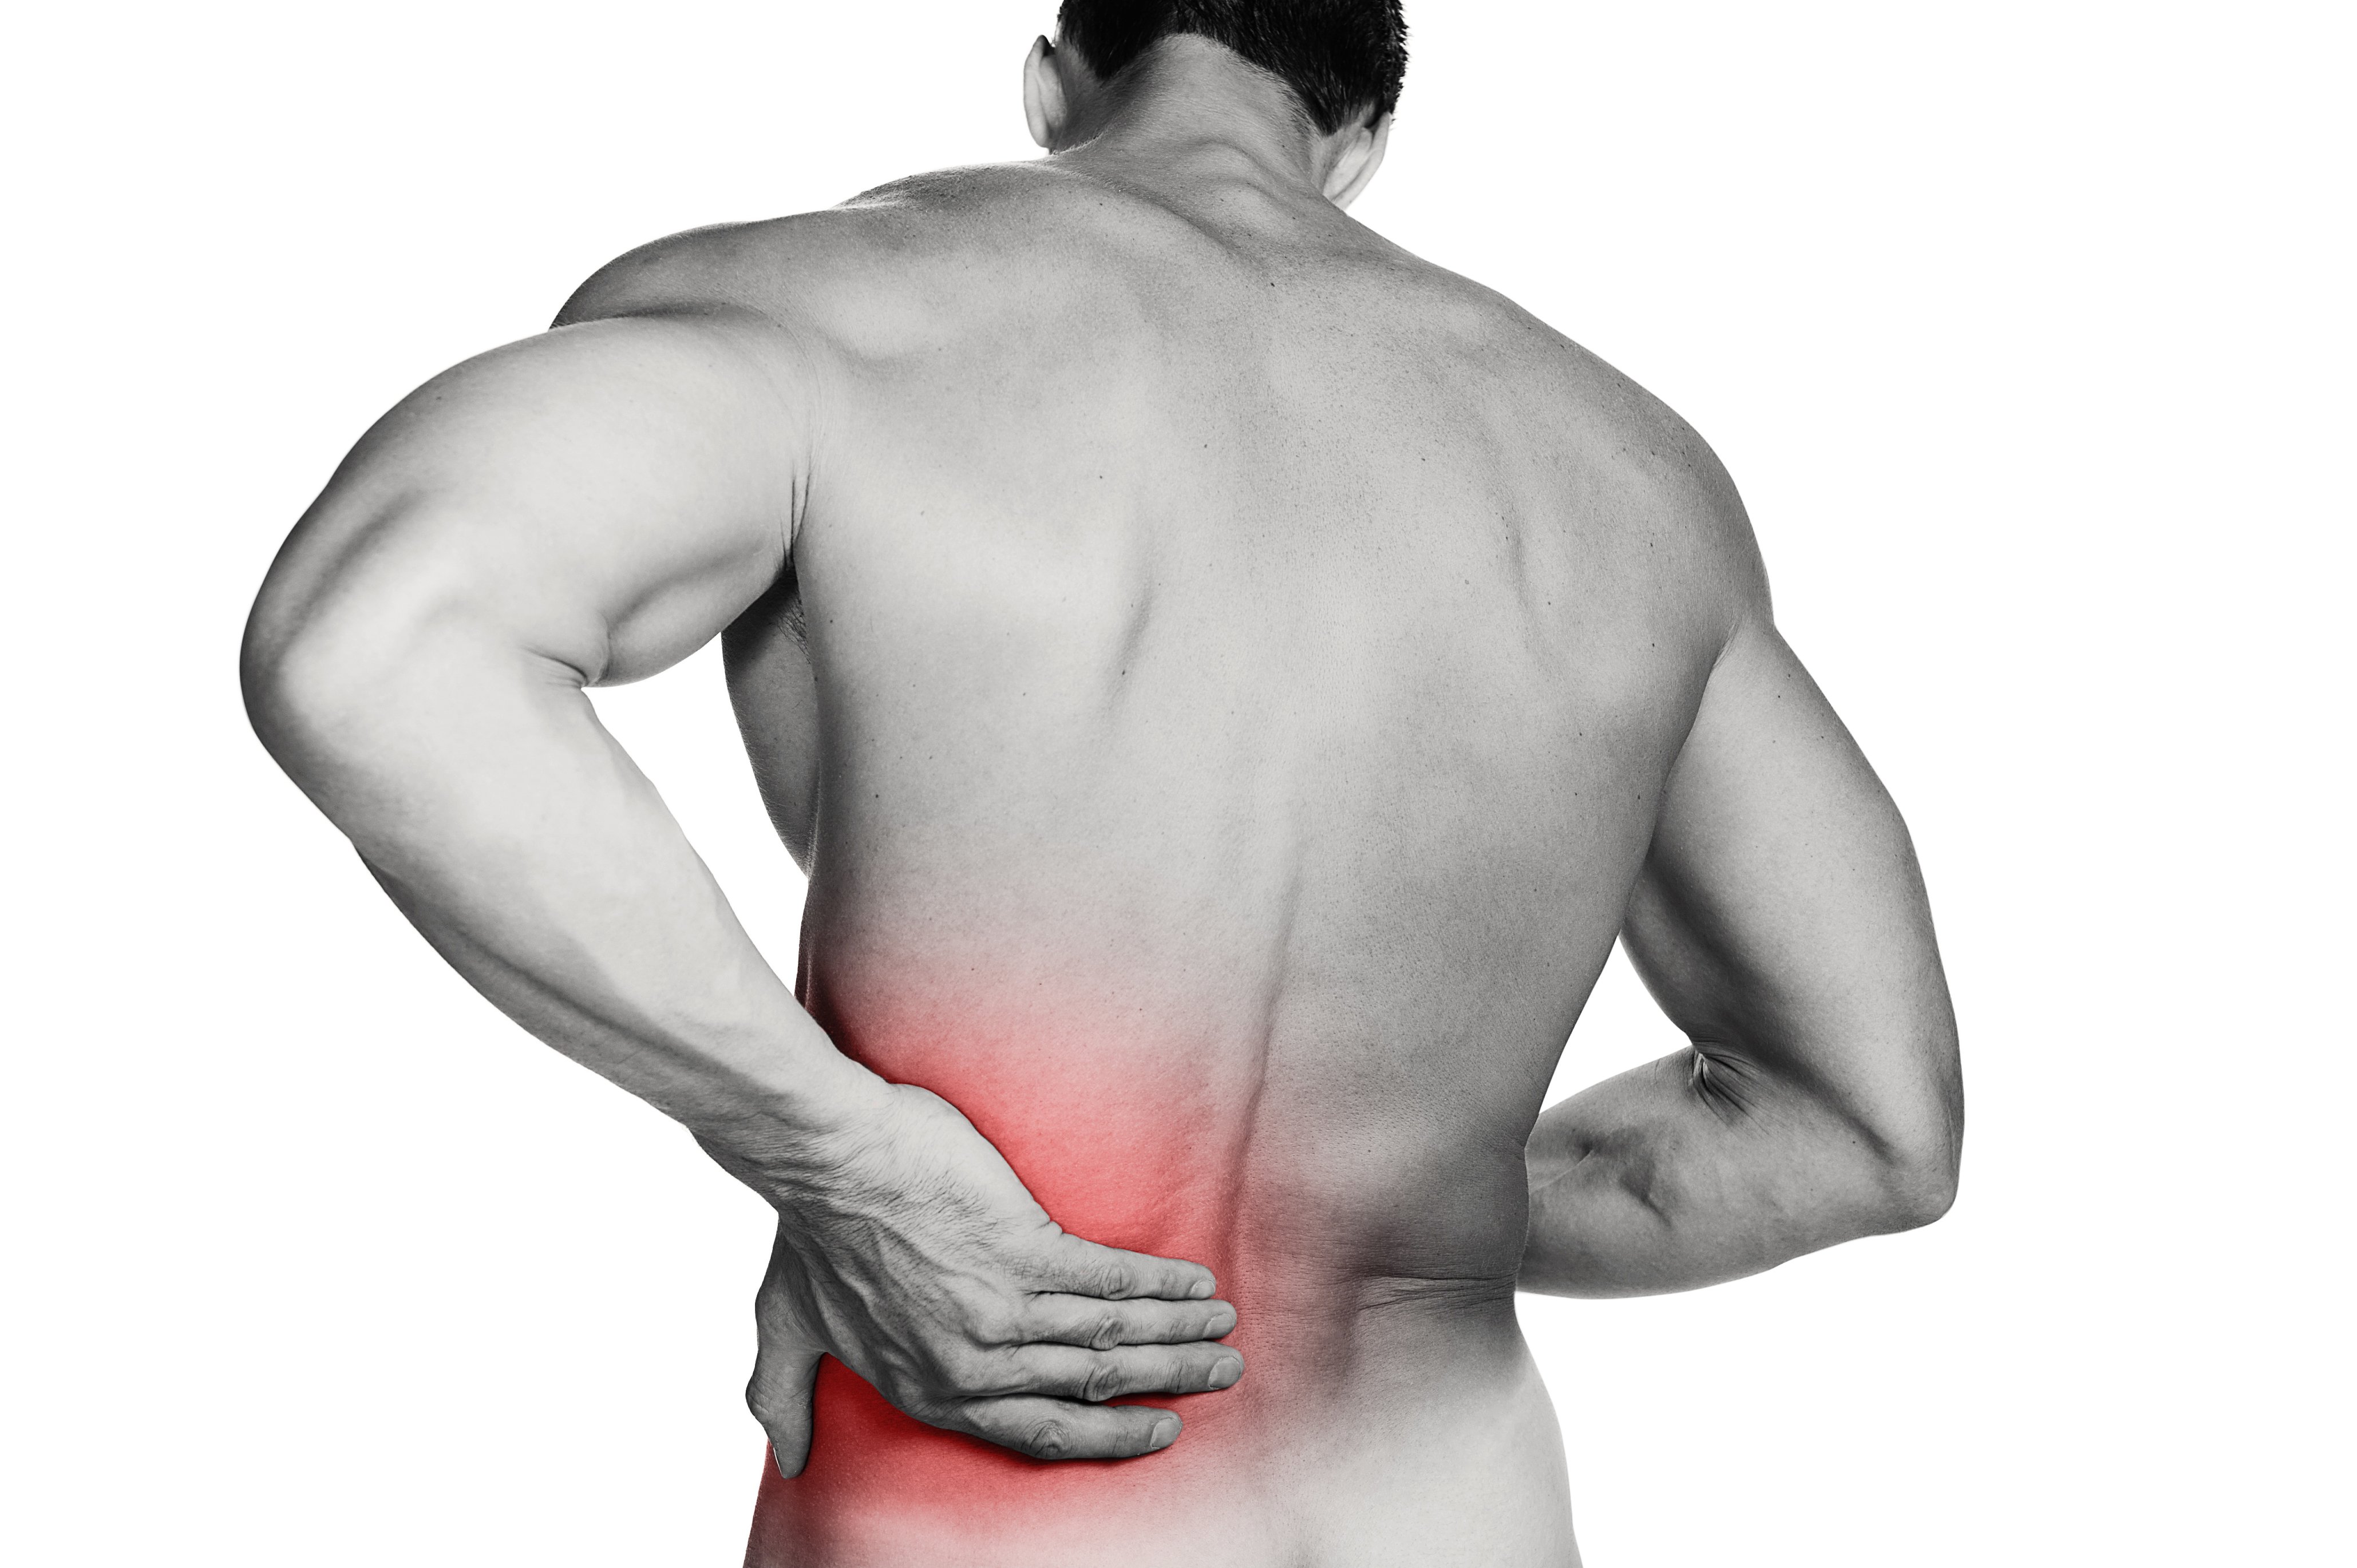 What are some symptoms of a lower-back tumor?